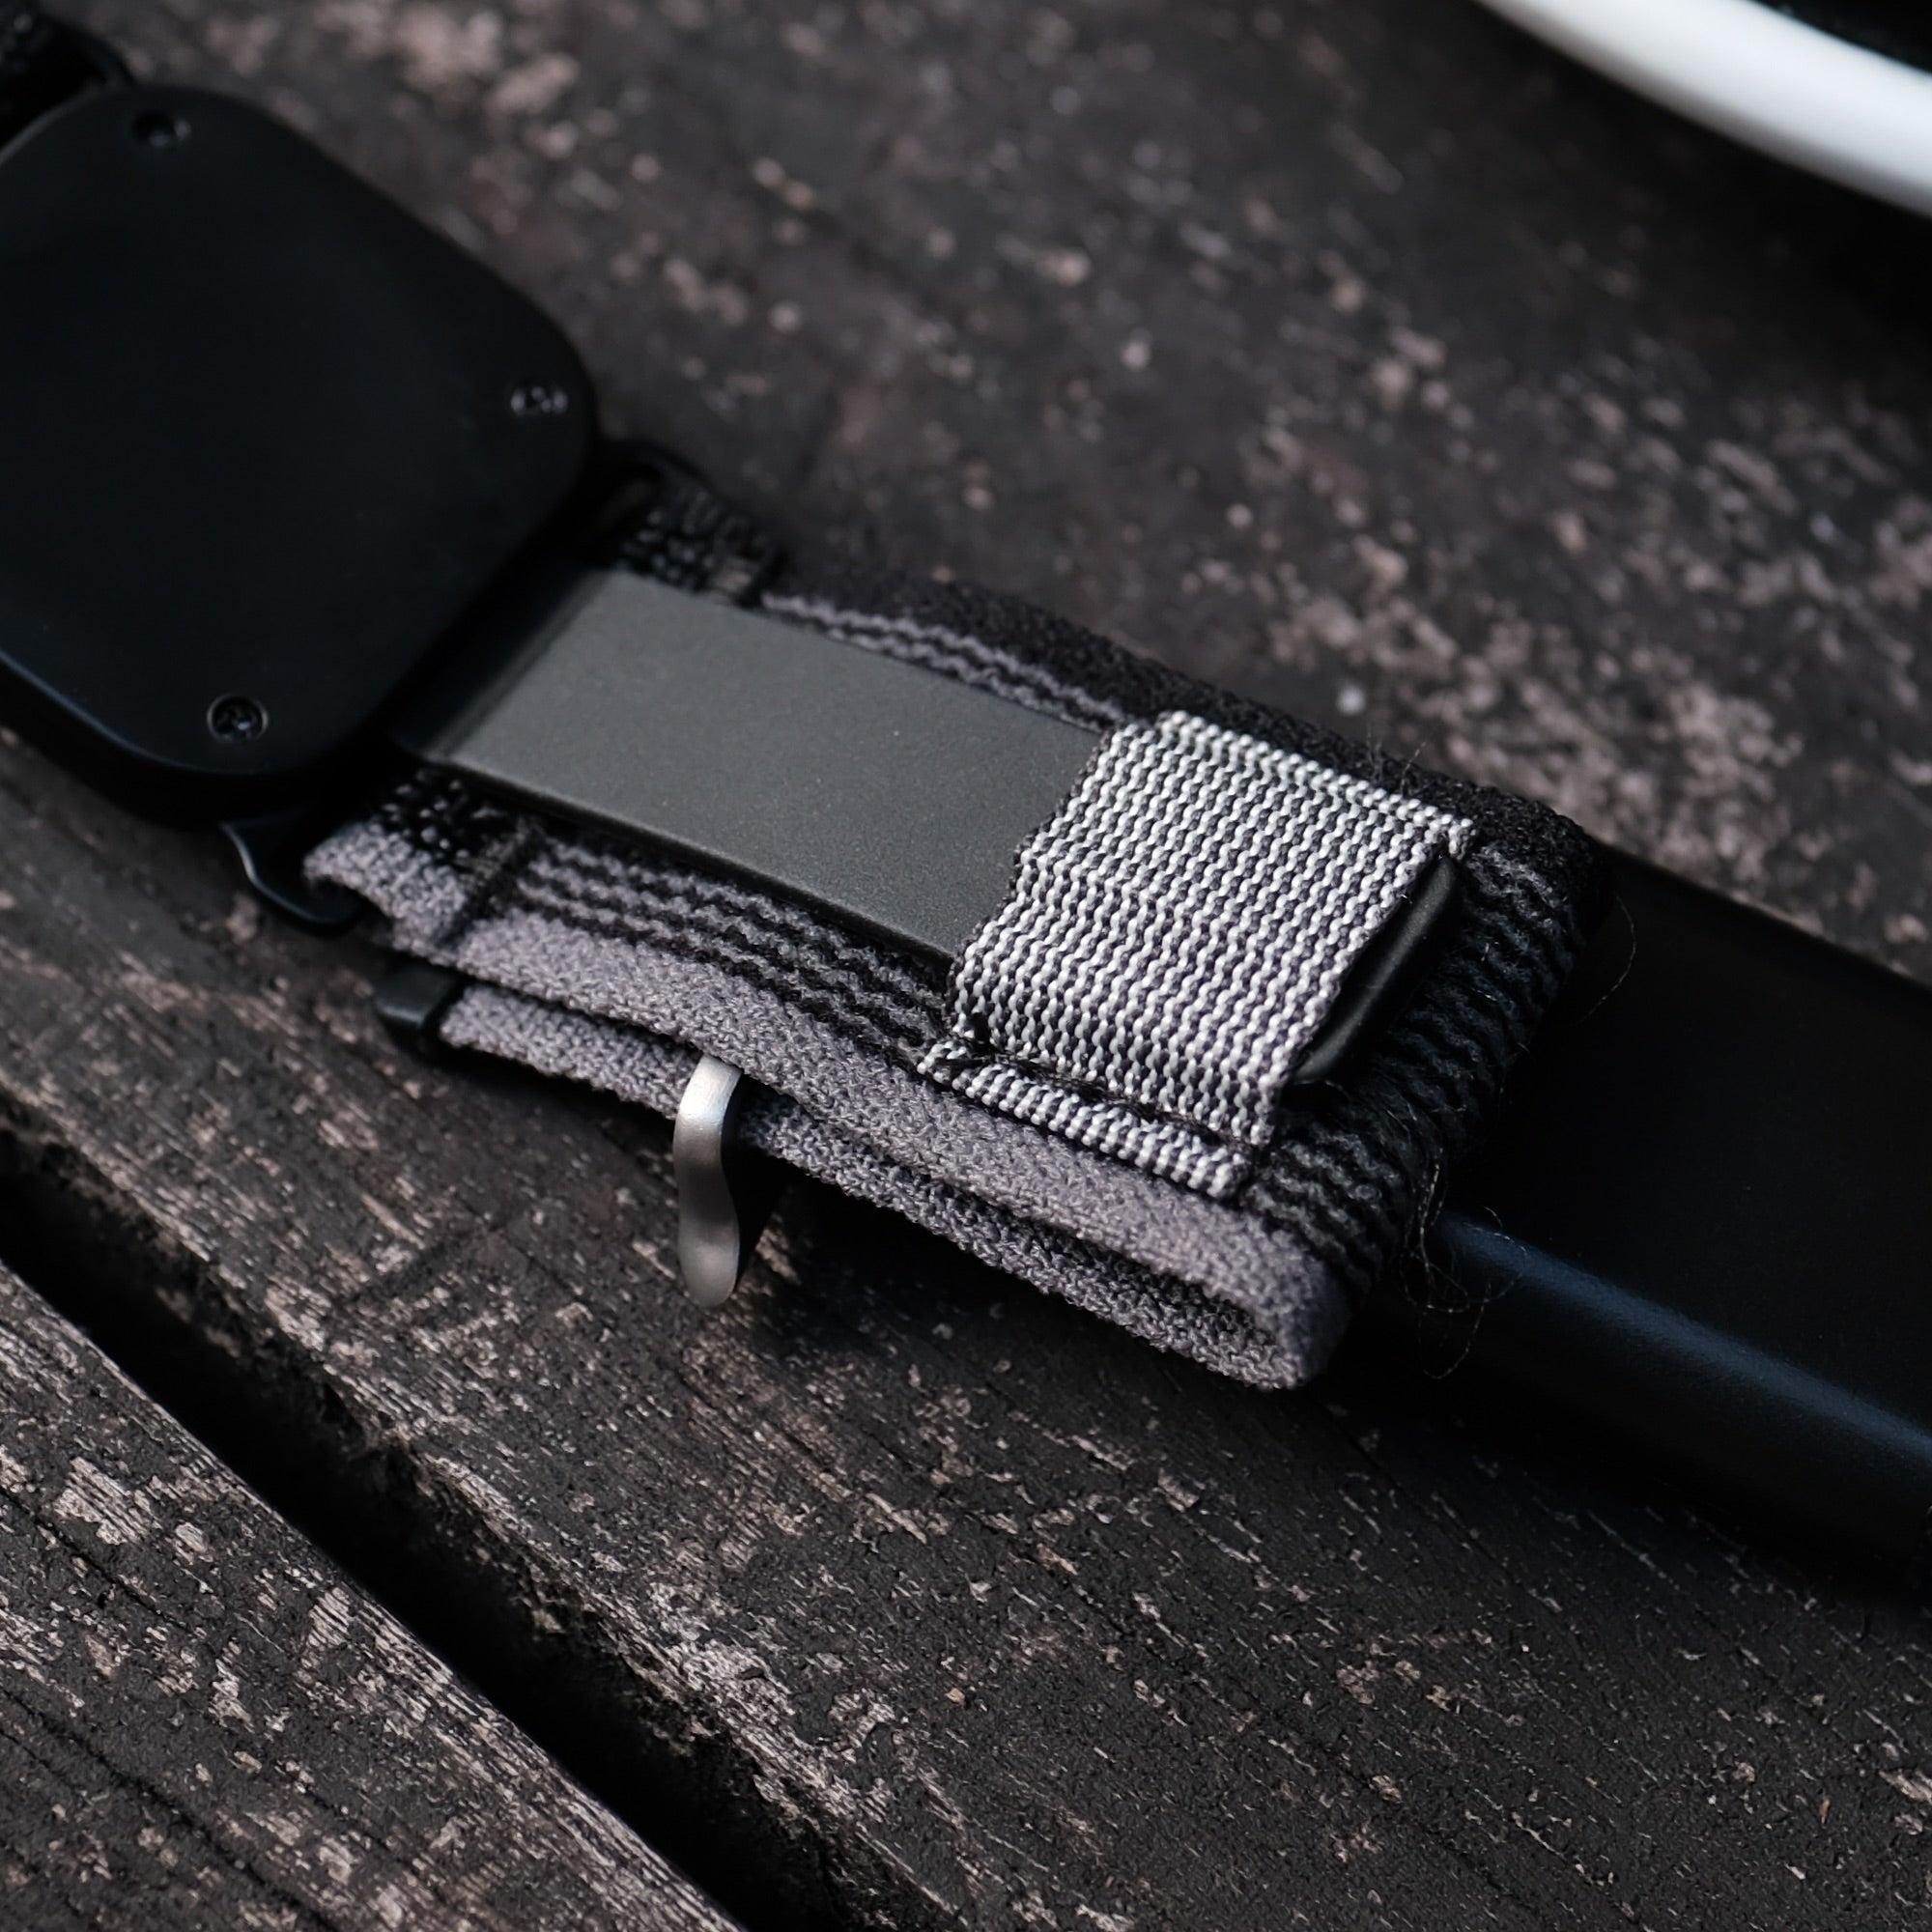 Pin & Buckle - Charge Weave Apple Watch Band with Built-in Wireless Charger